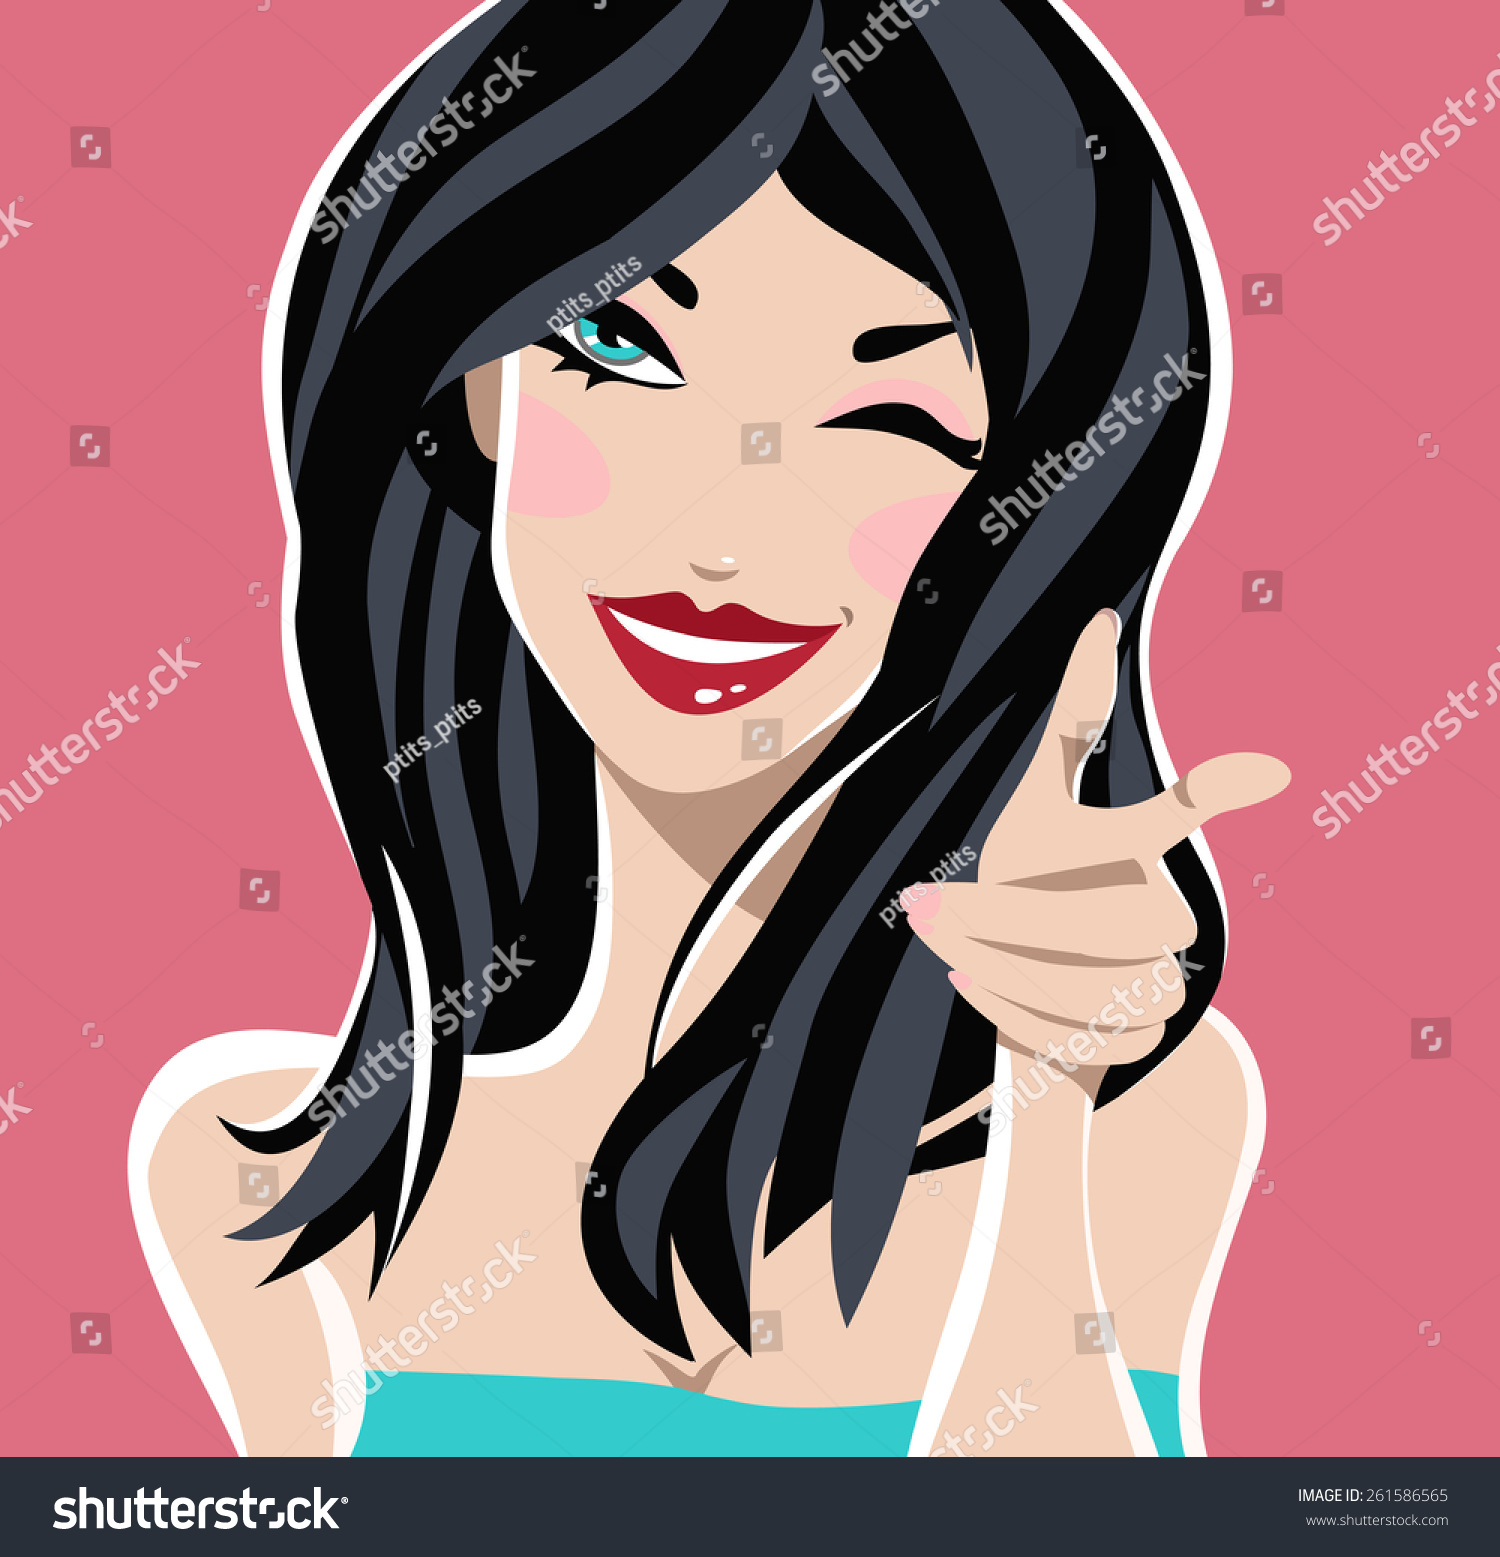 Smiling Girl With Black Hair. Vector Illustration - 261586565